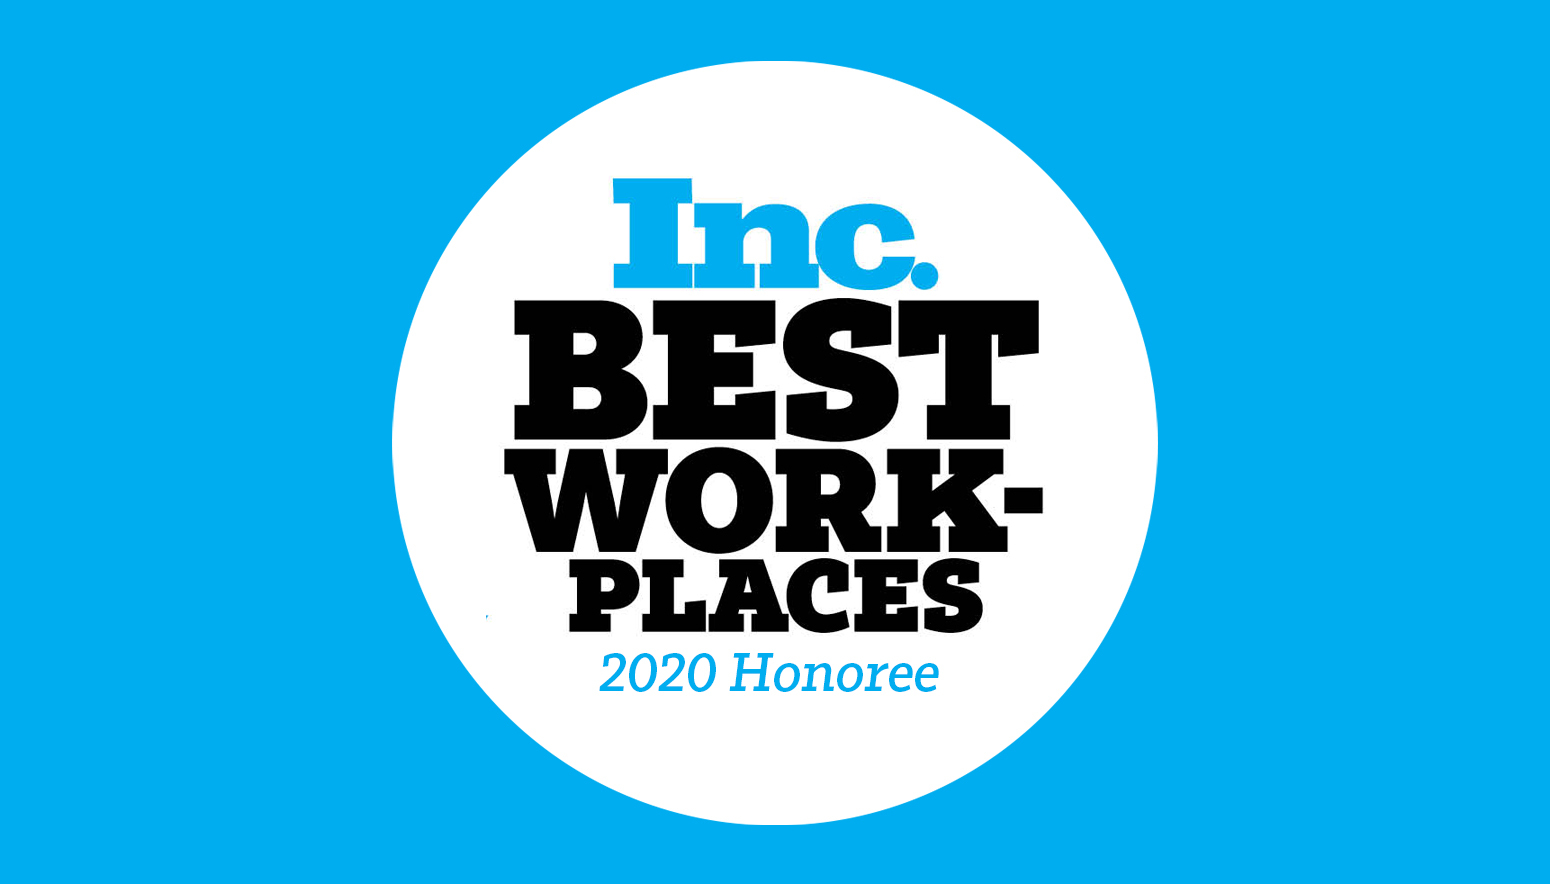 Pushnami Is One of Inc. Magazine’s Best Workplaces 2020